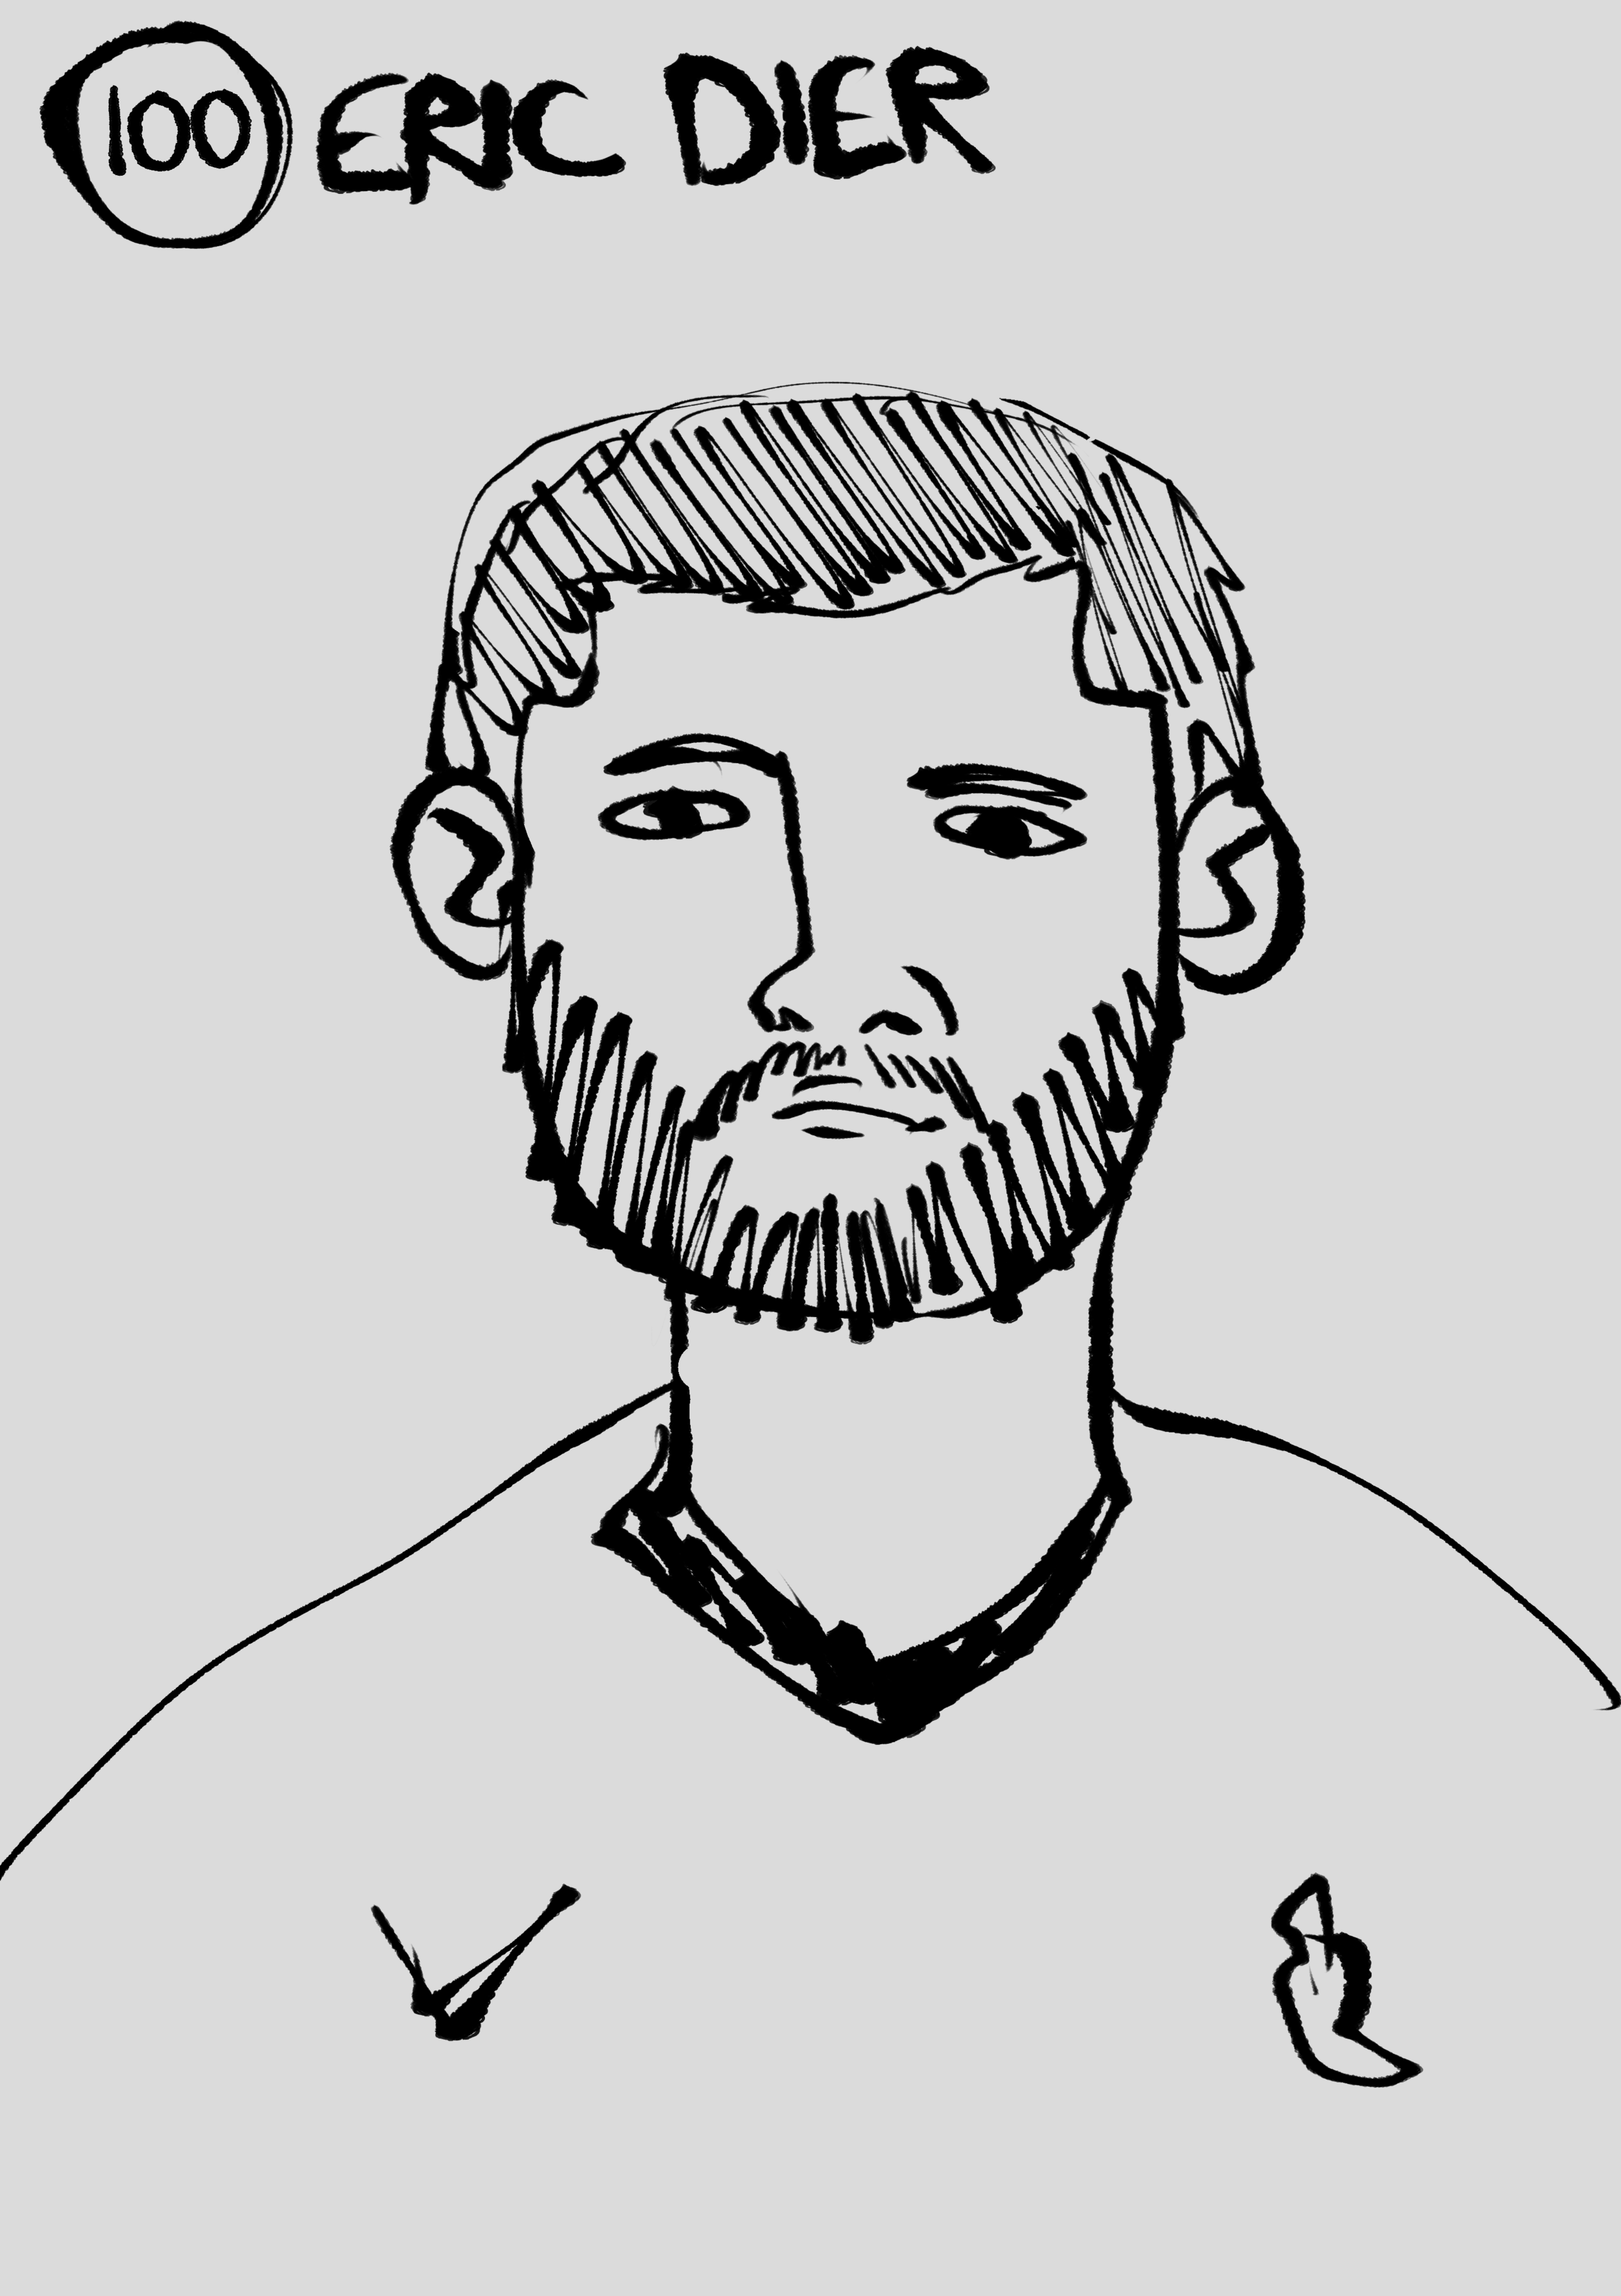 100 eric dier.png